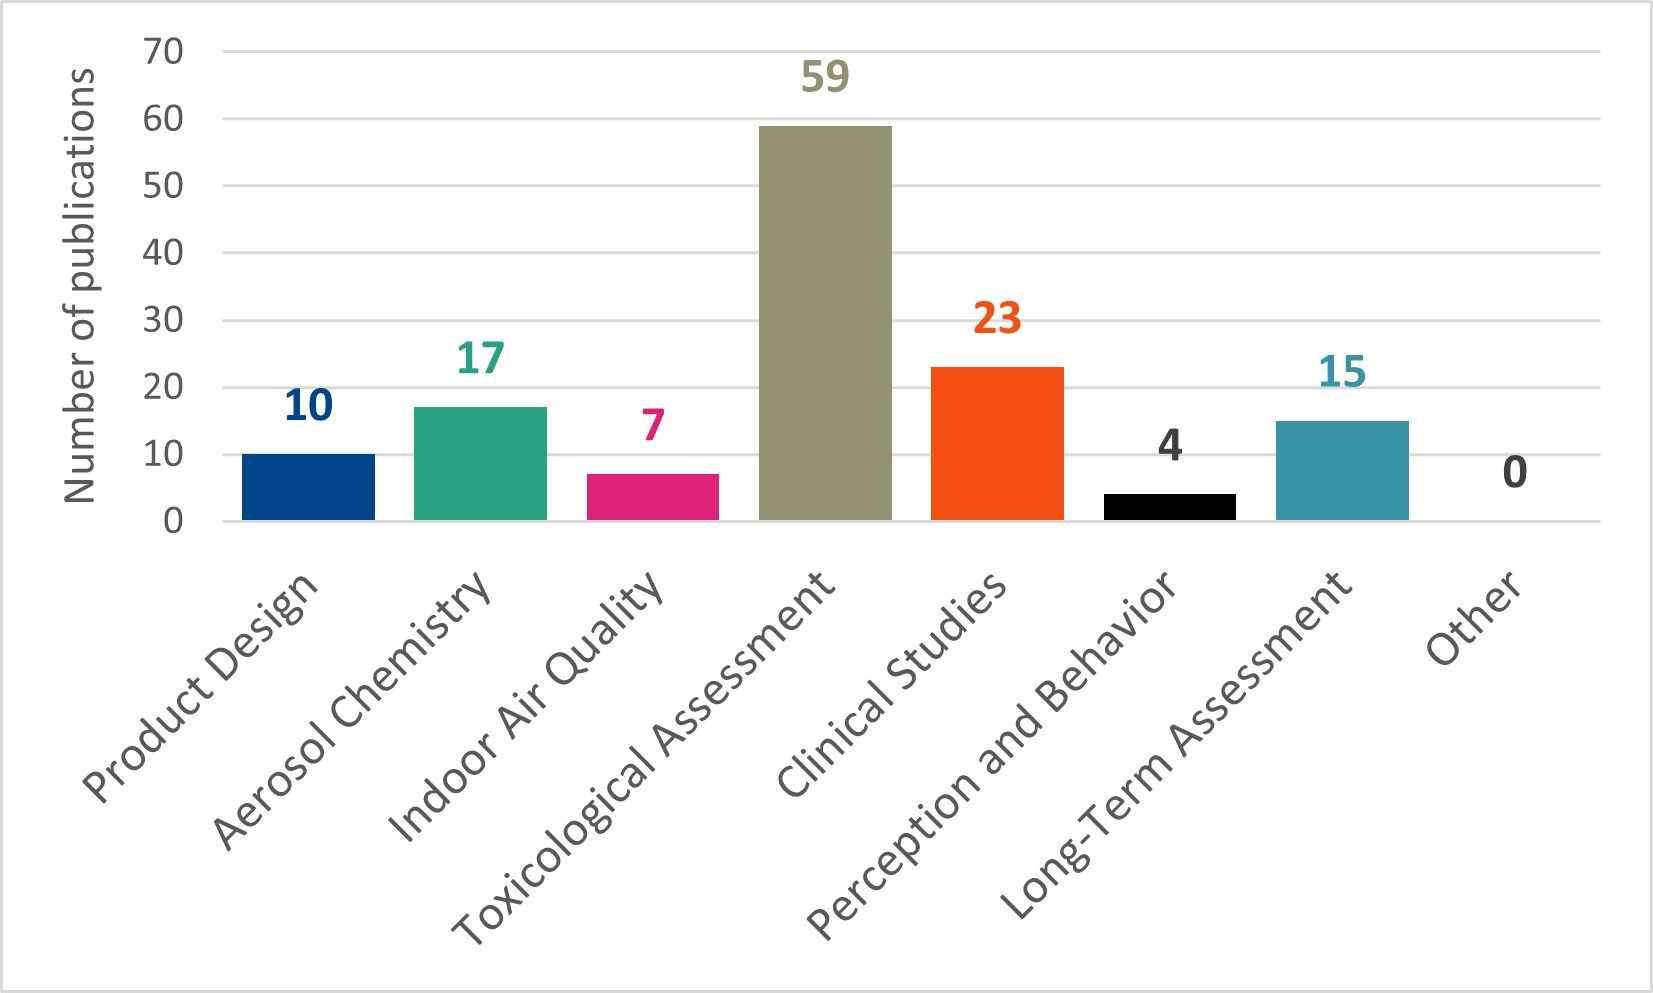 Bar chart showing JTI's publication totals at each stage